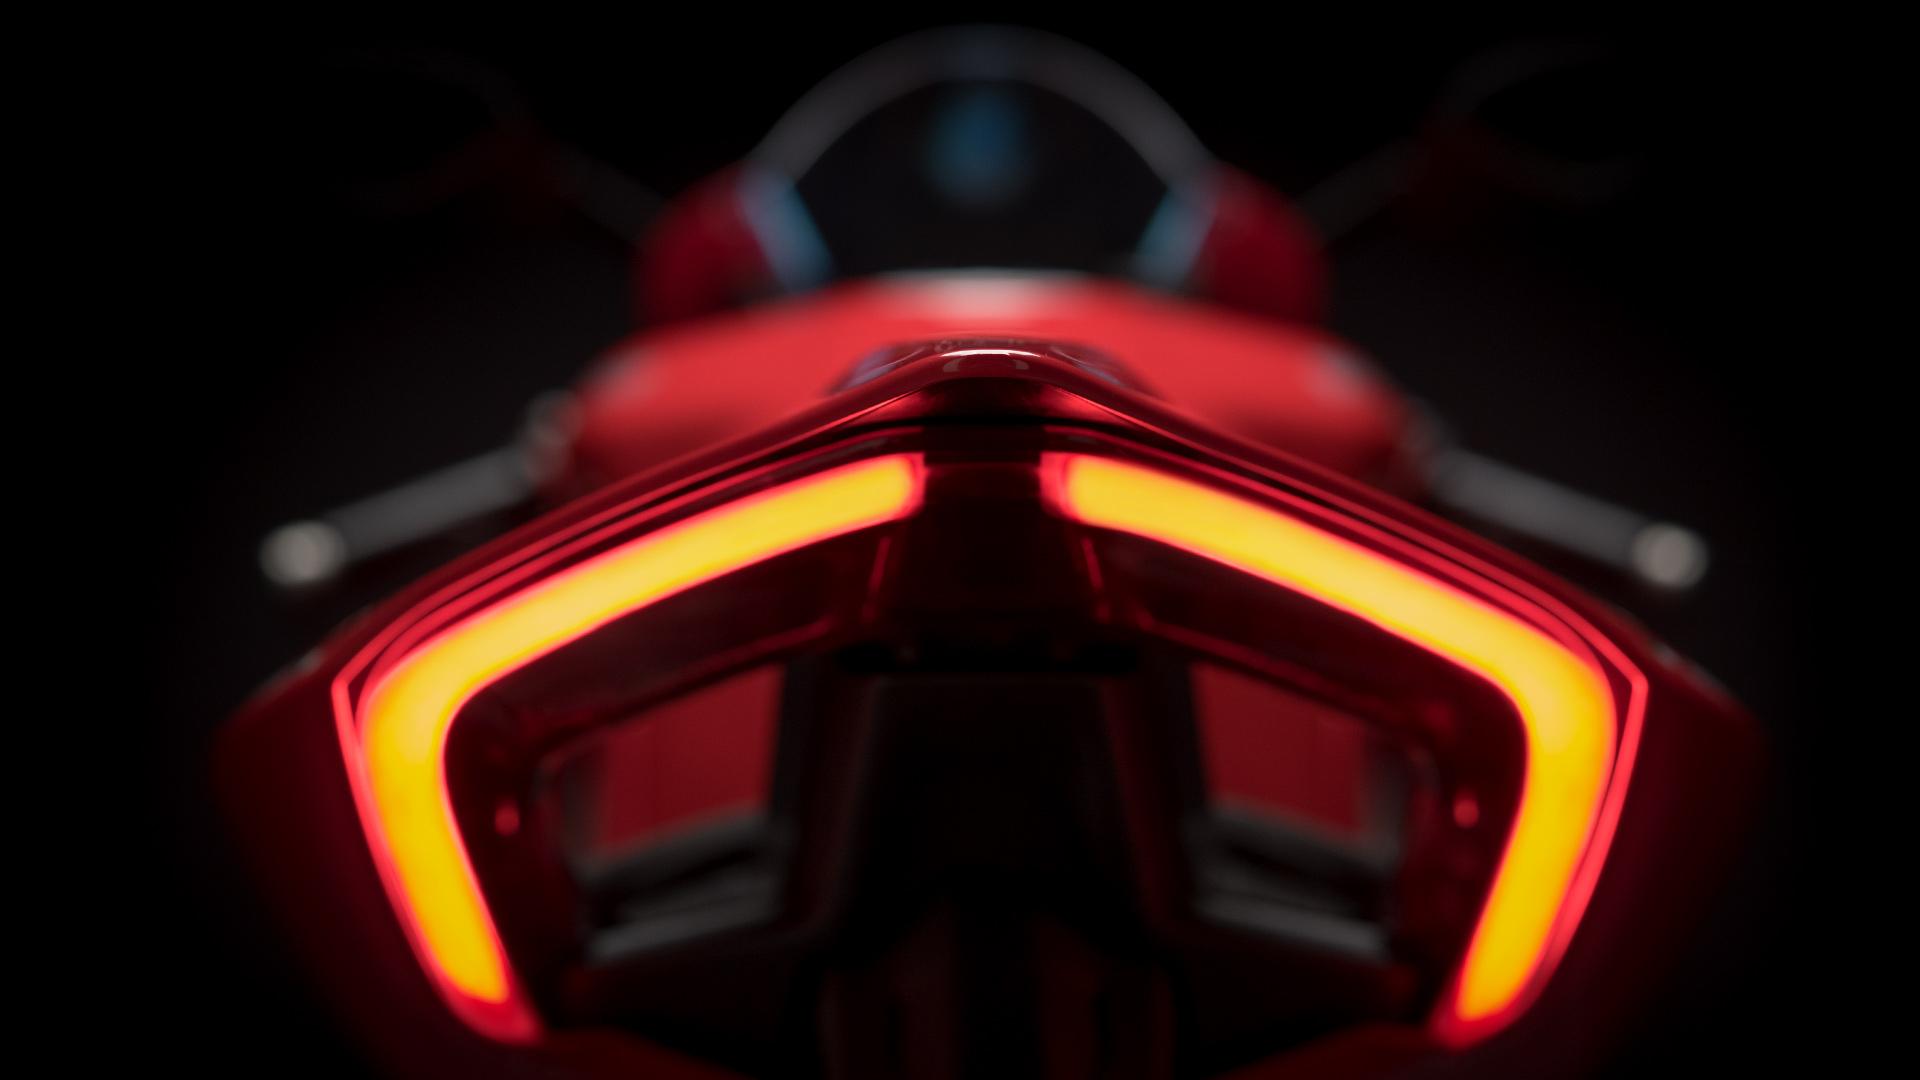 Ducati Superbike Panigale: No Room for Compromise